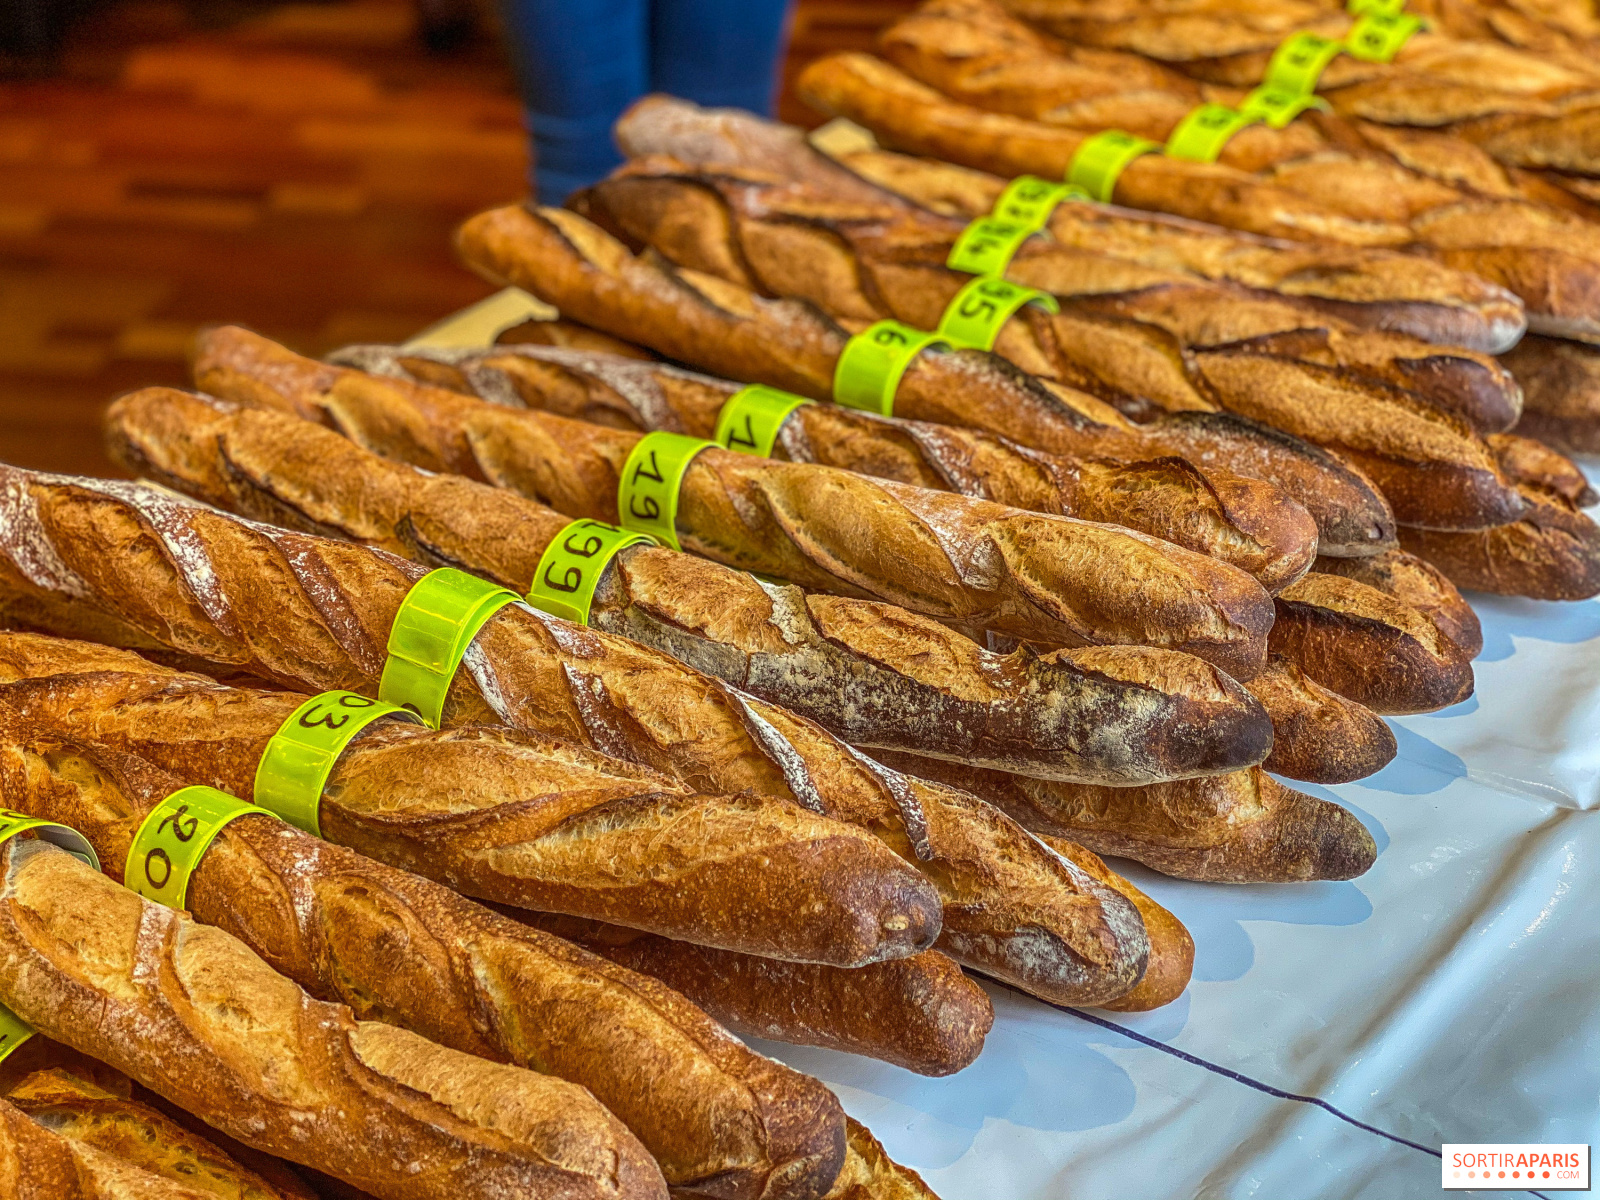 Paris best baguette 2021 to be found in the 12th arrondissement at Les